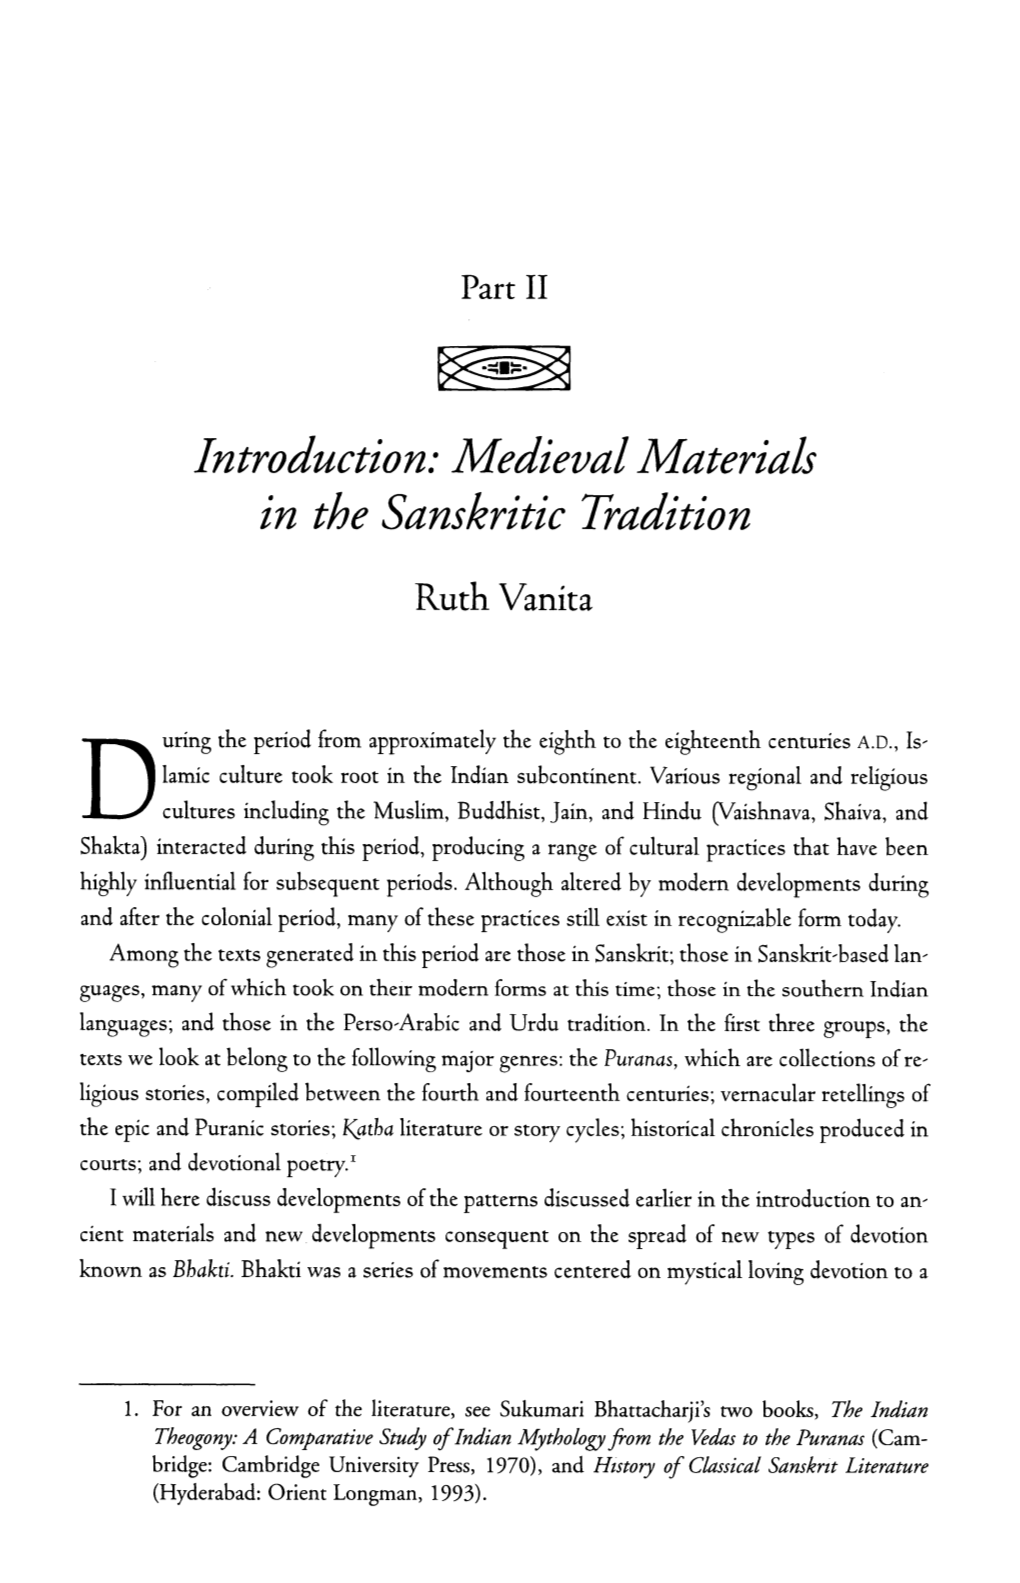 Introduction: Medieval Materials in the Sanskritic Tradition